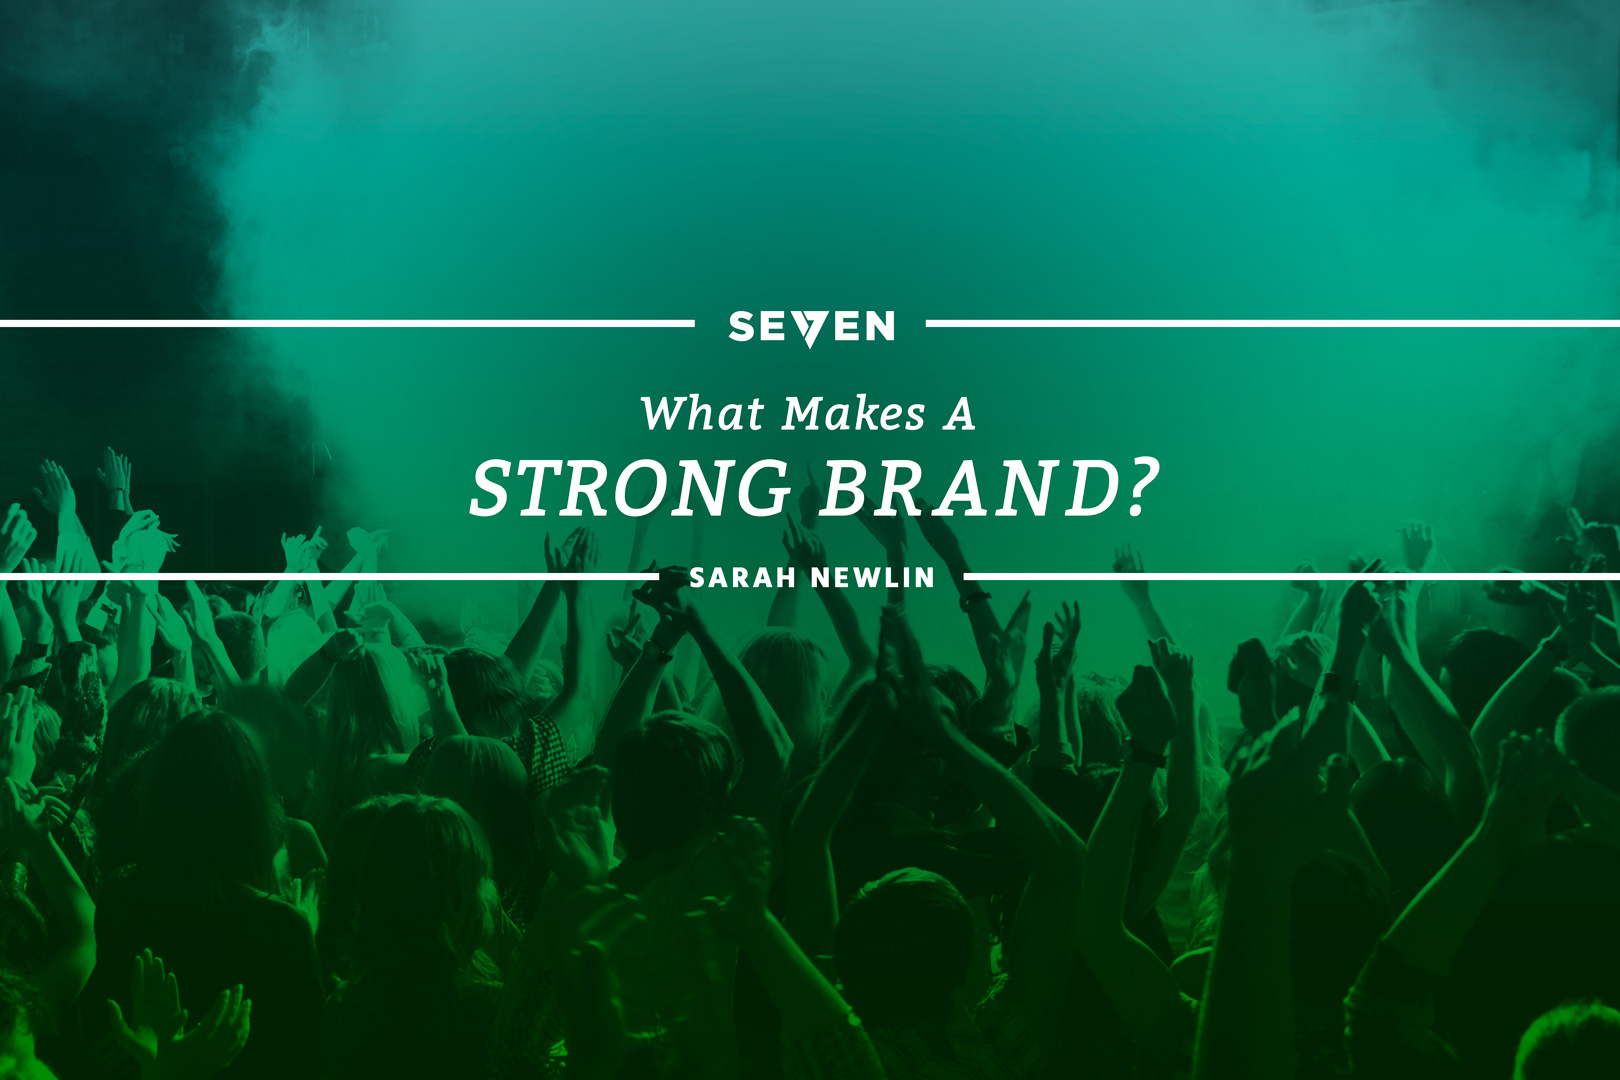 What Makes a Strong Brand